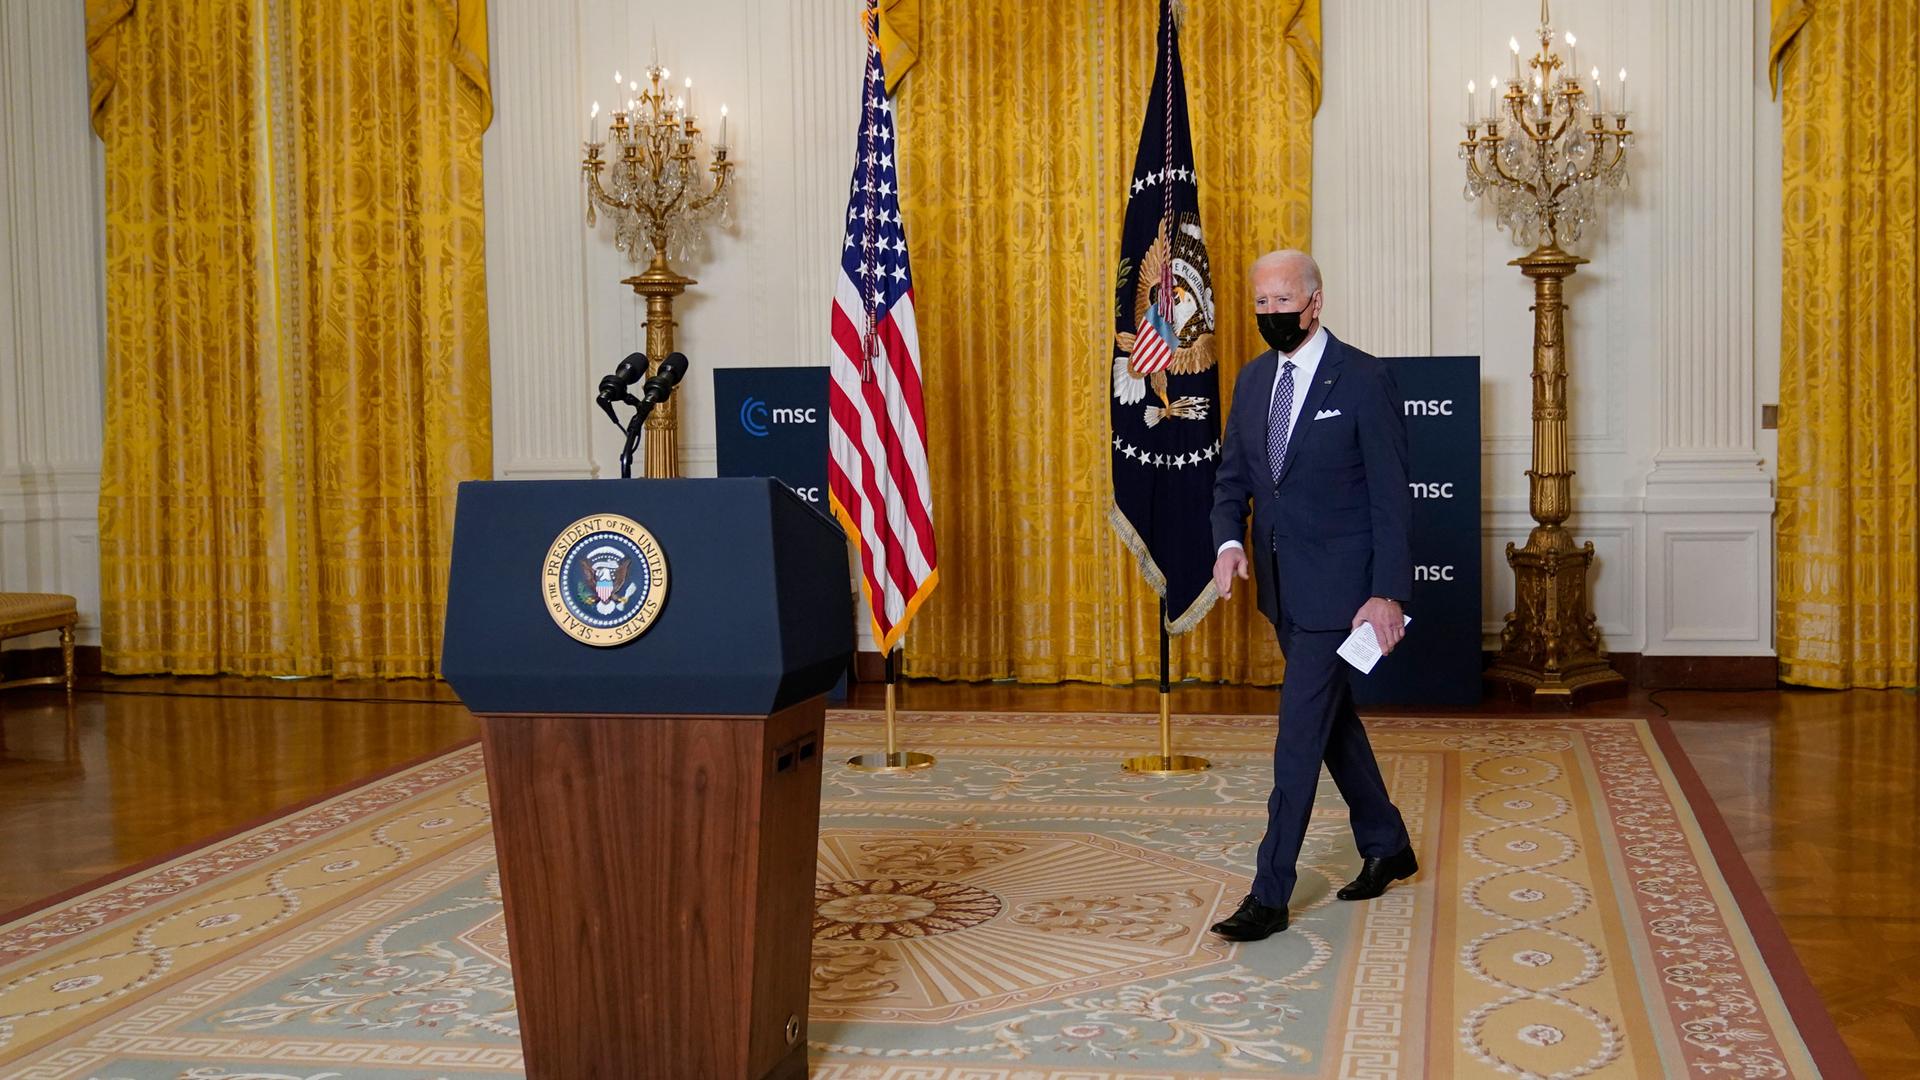 President Joe Biden is shown walking toward a podium with the White House crest on it and carrying a white piece of paper.